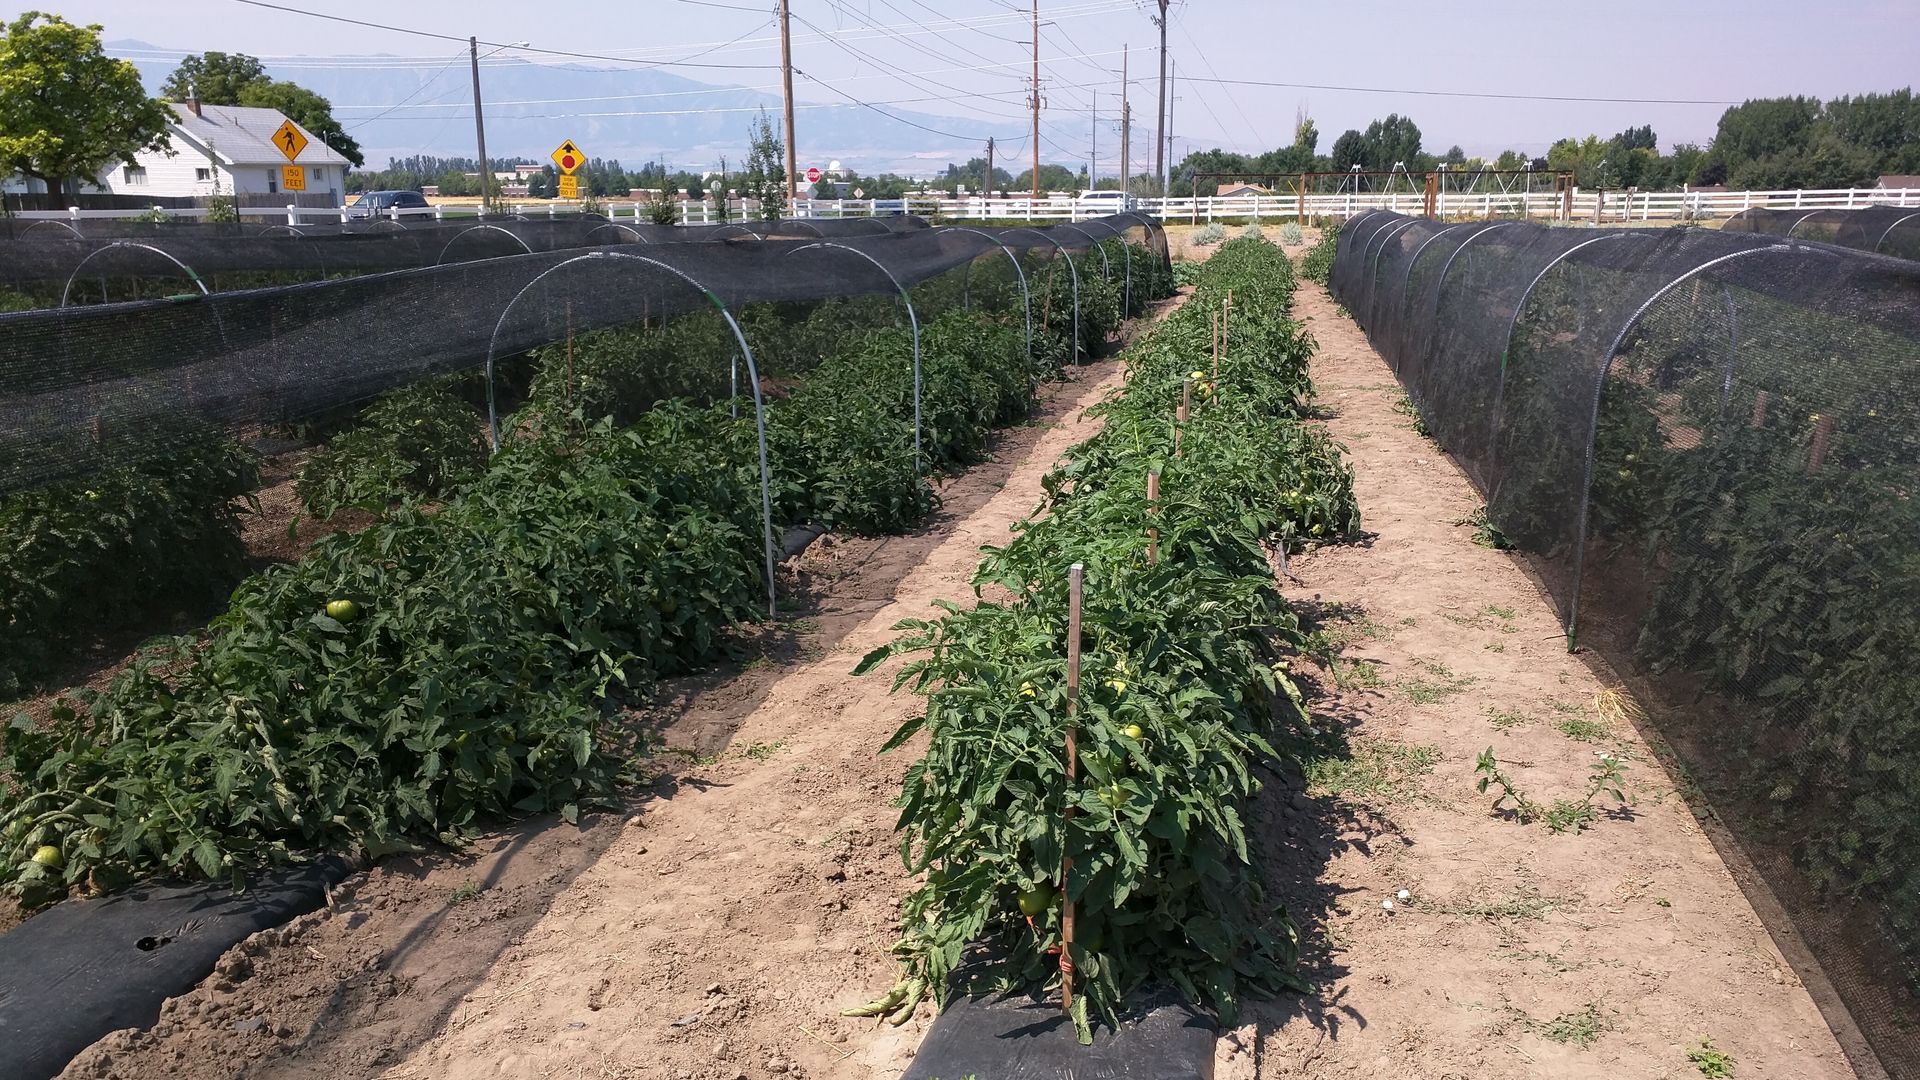 Tomato plants under shade structures in a field grow more lush than plants without shade.